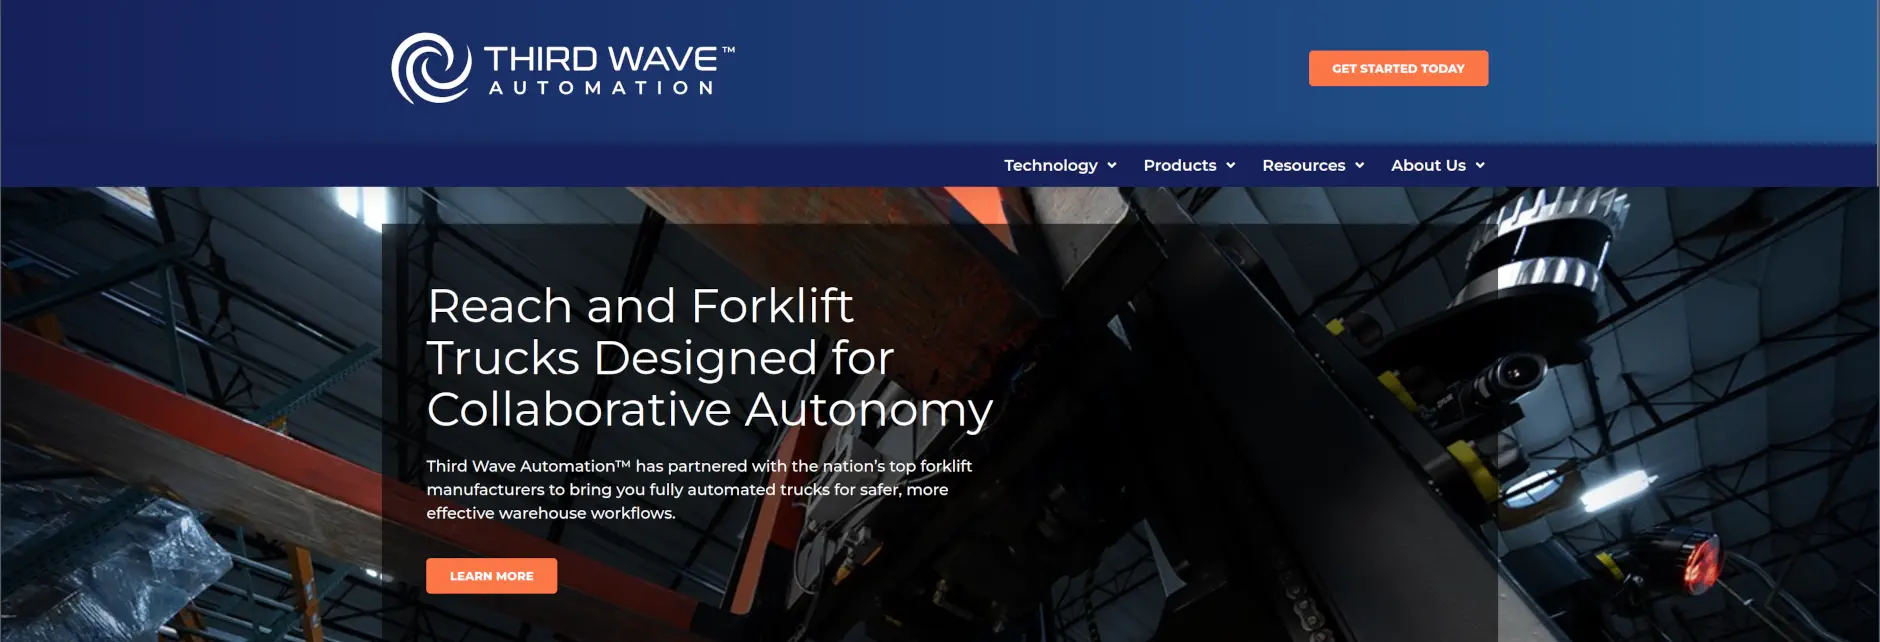 Third Wave Automation